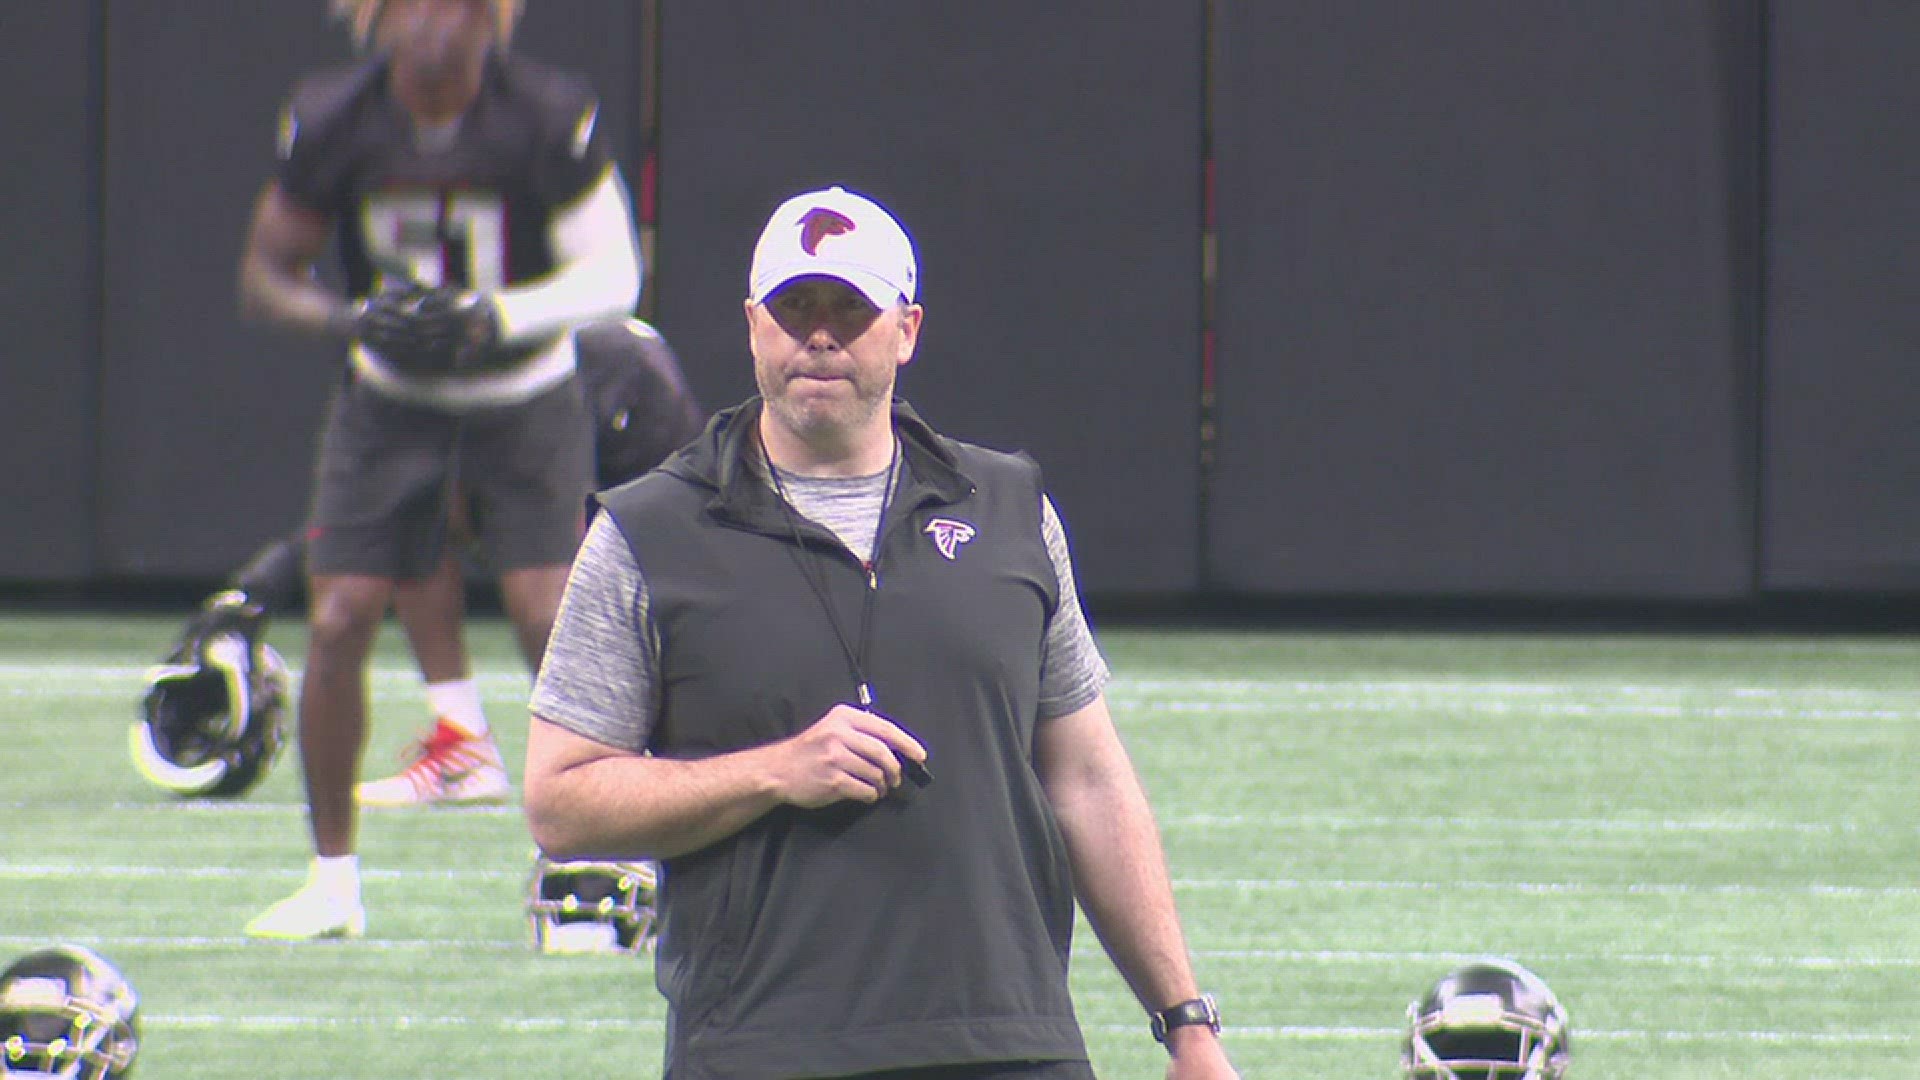 The Falcons practiced extensively inside Mercedes-Benz Stadium on Friday.